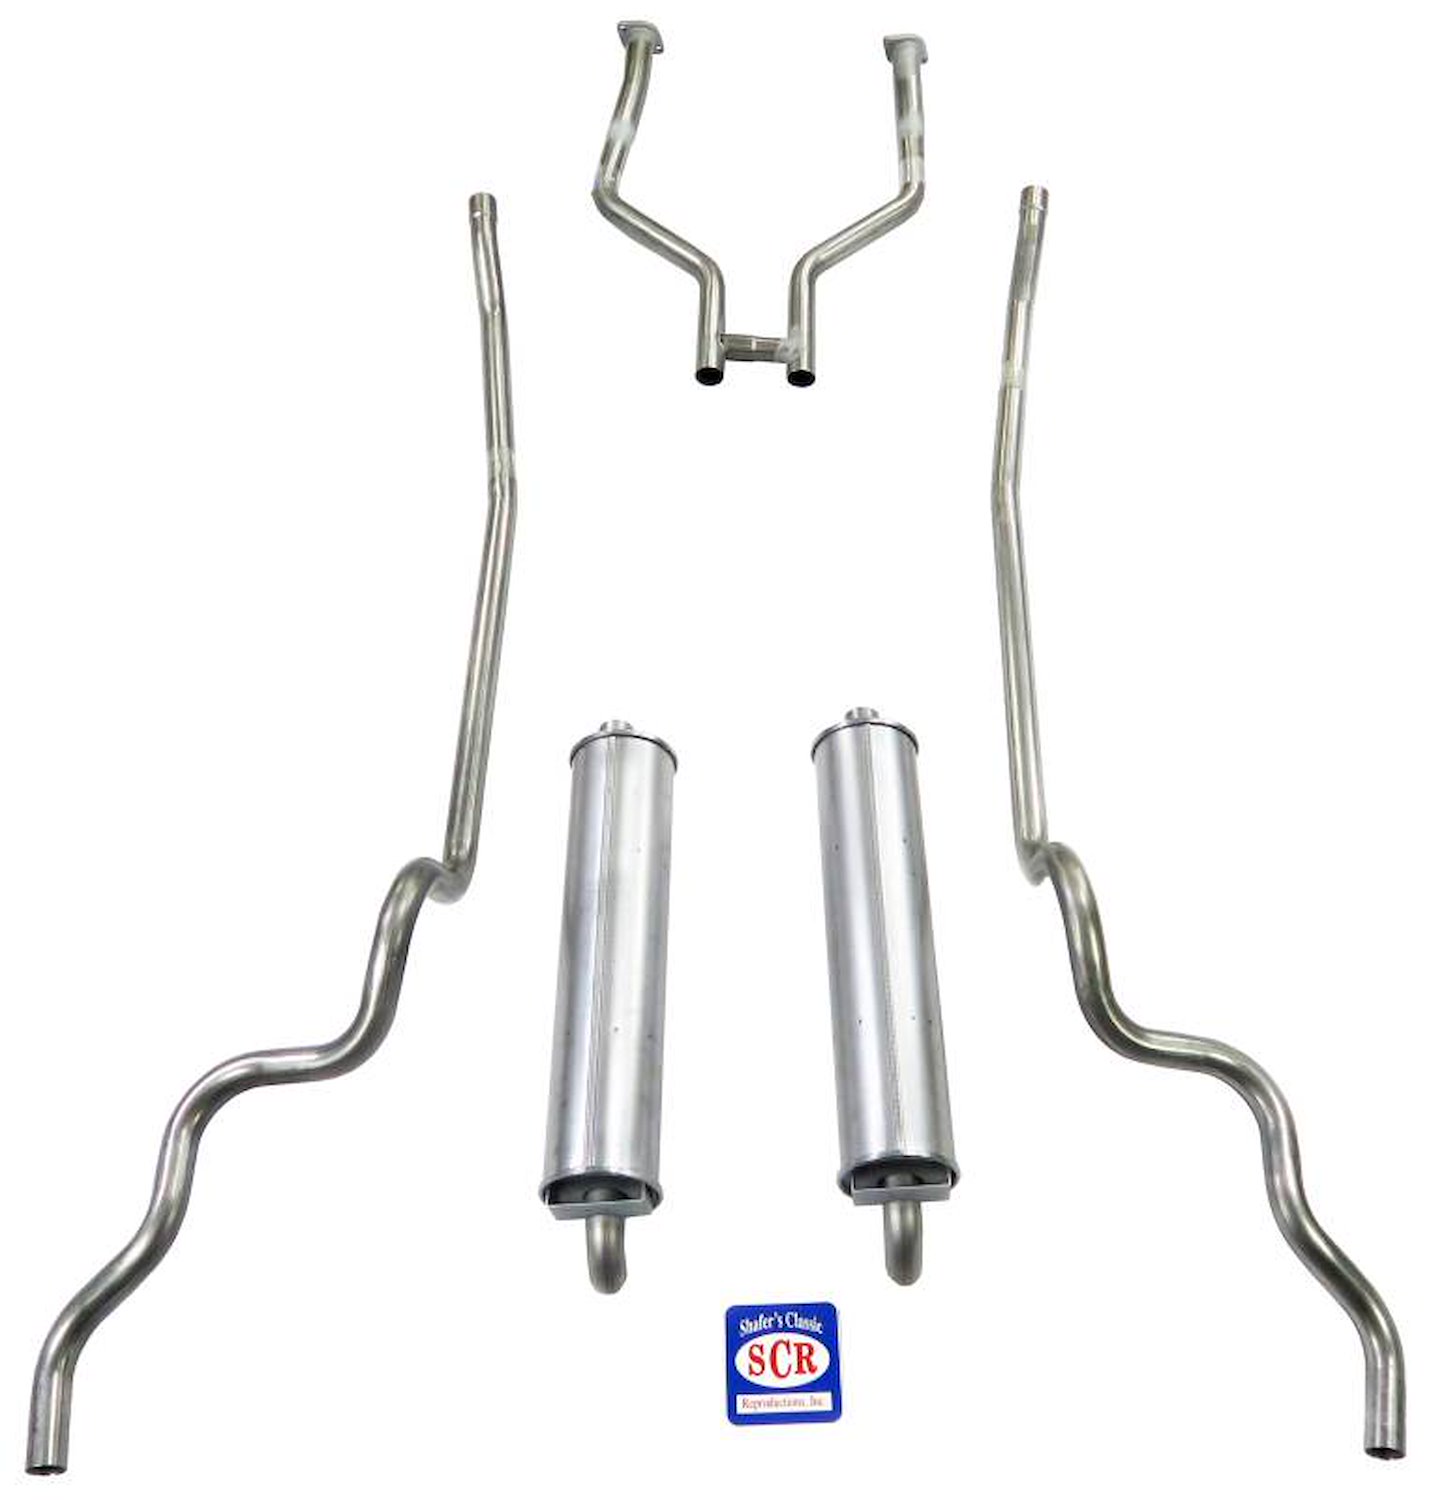 83021 1963-64 Full-Size Ford 2 in. Exhaust System Big Block V8